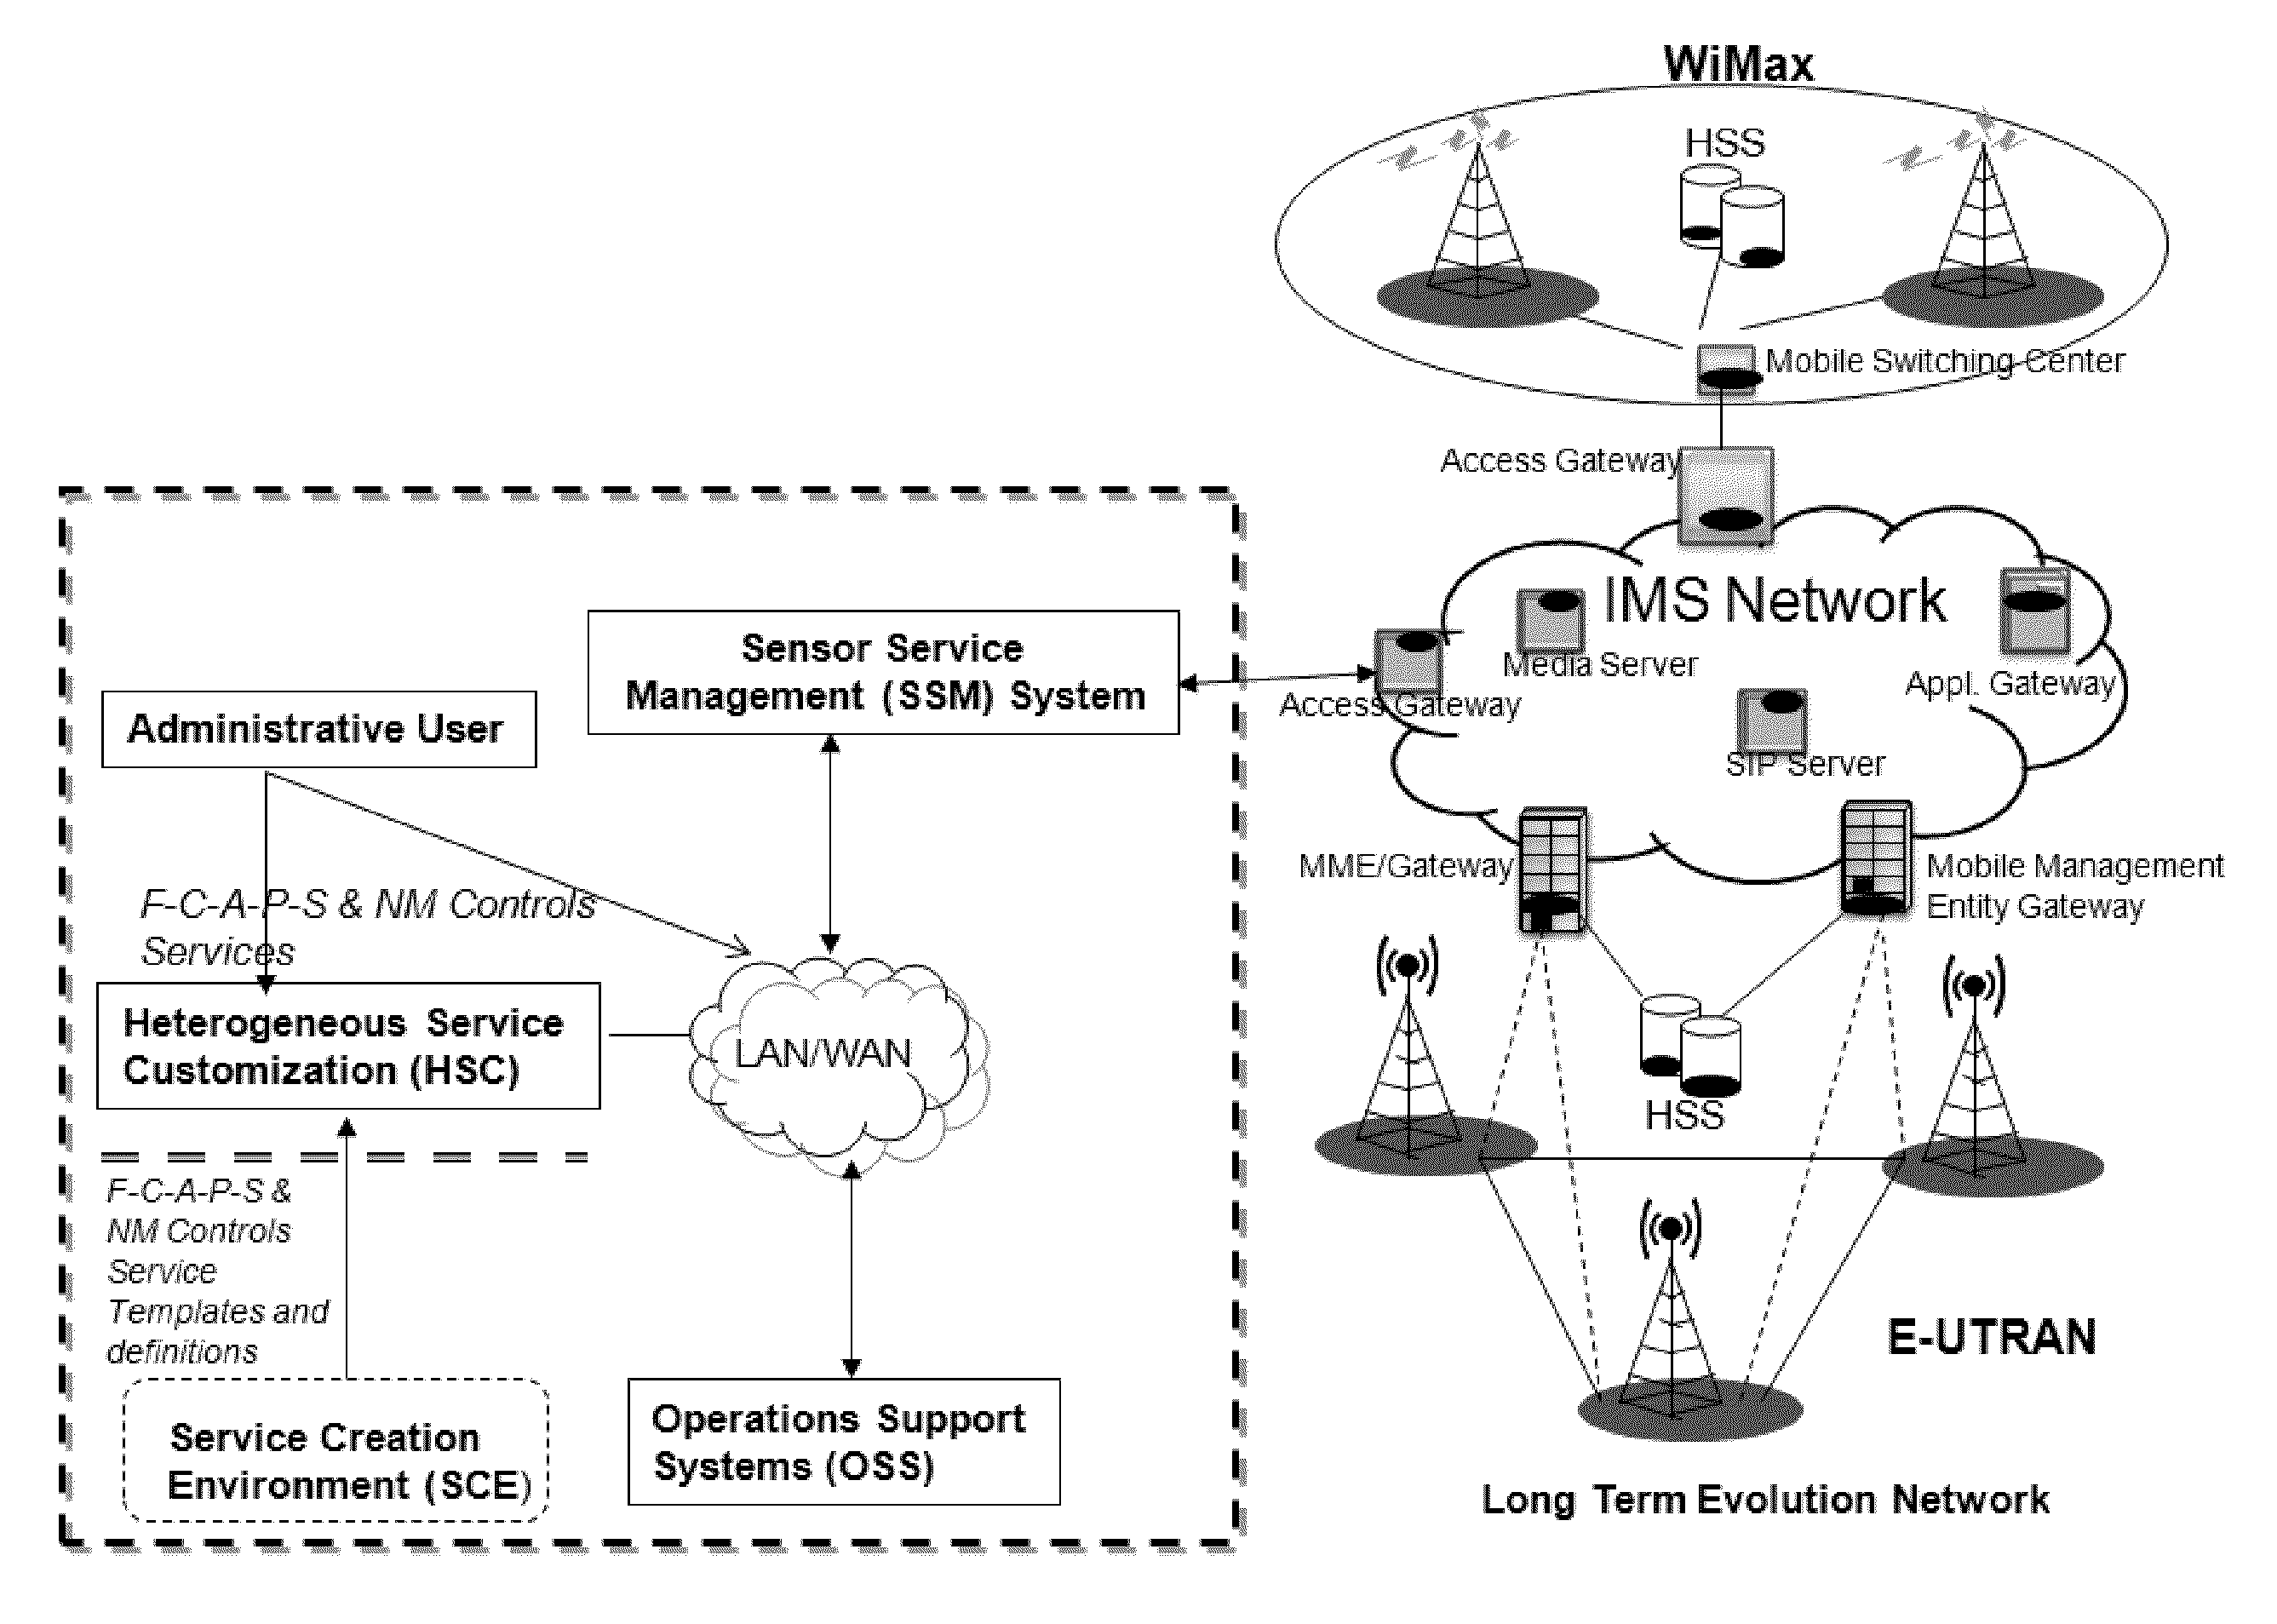 Apparatus and methods for real-time multimedia network traffic management and control in wireless networks